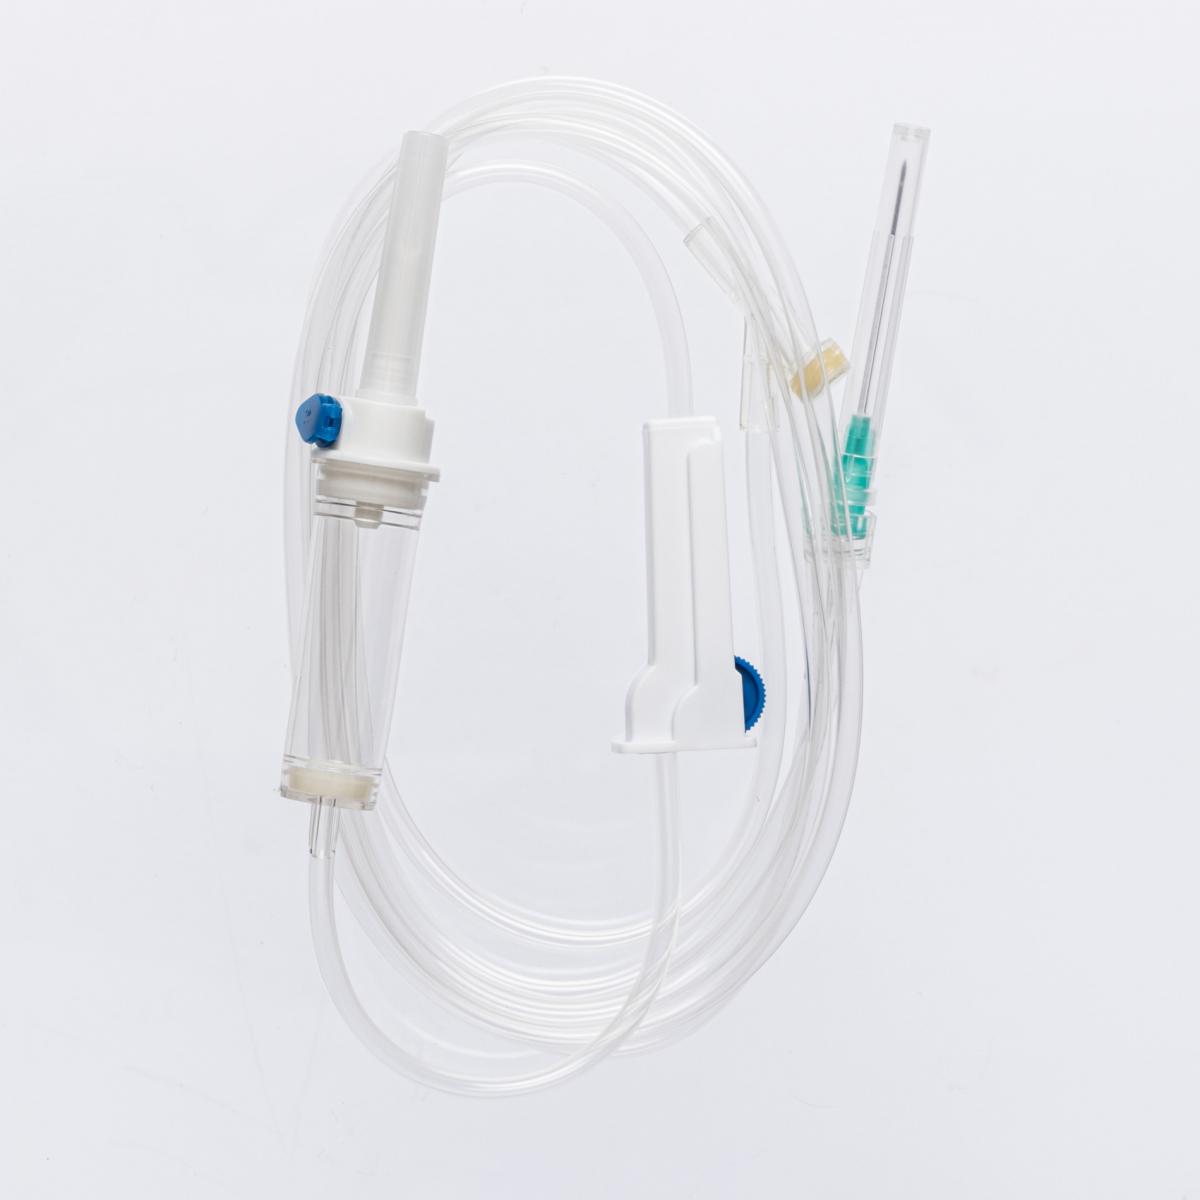 Microset / IV Infusion Set (Pedia), COSMED – Philippine Medical Supplies